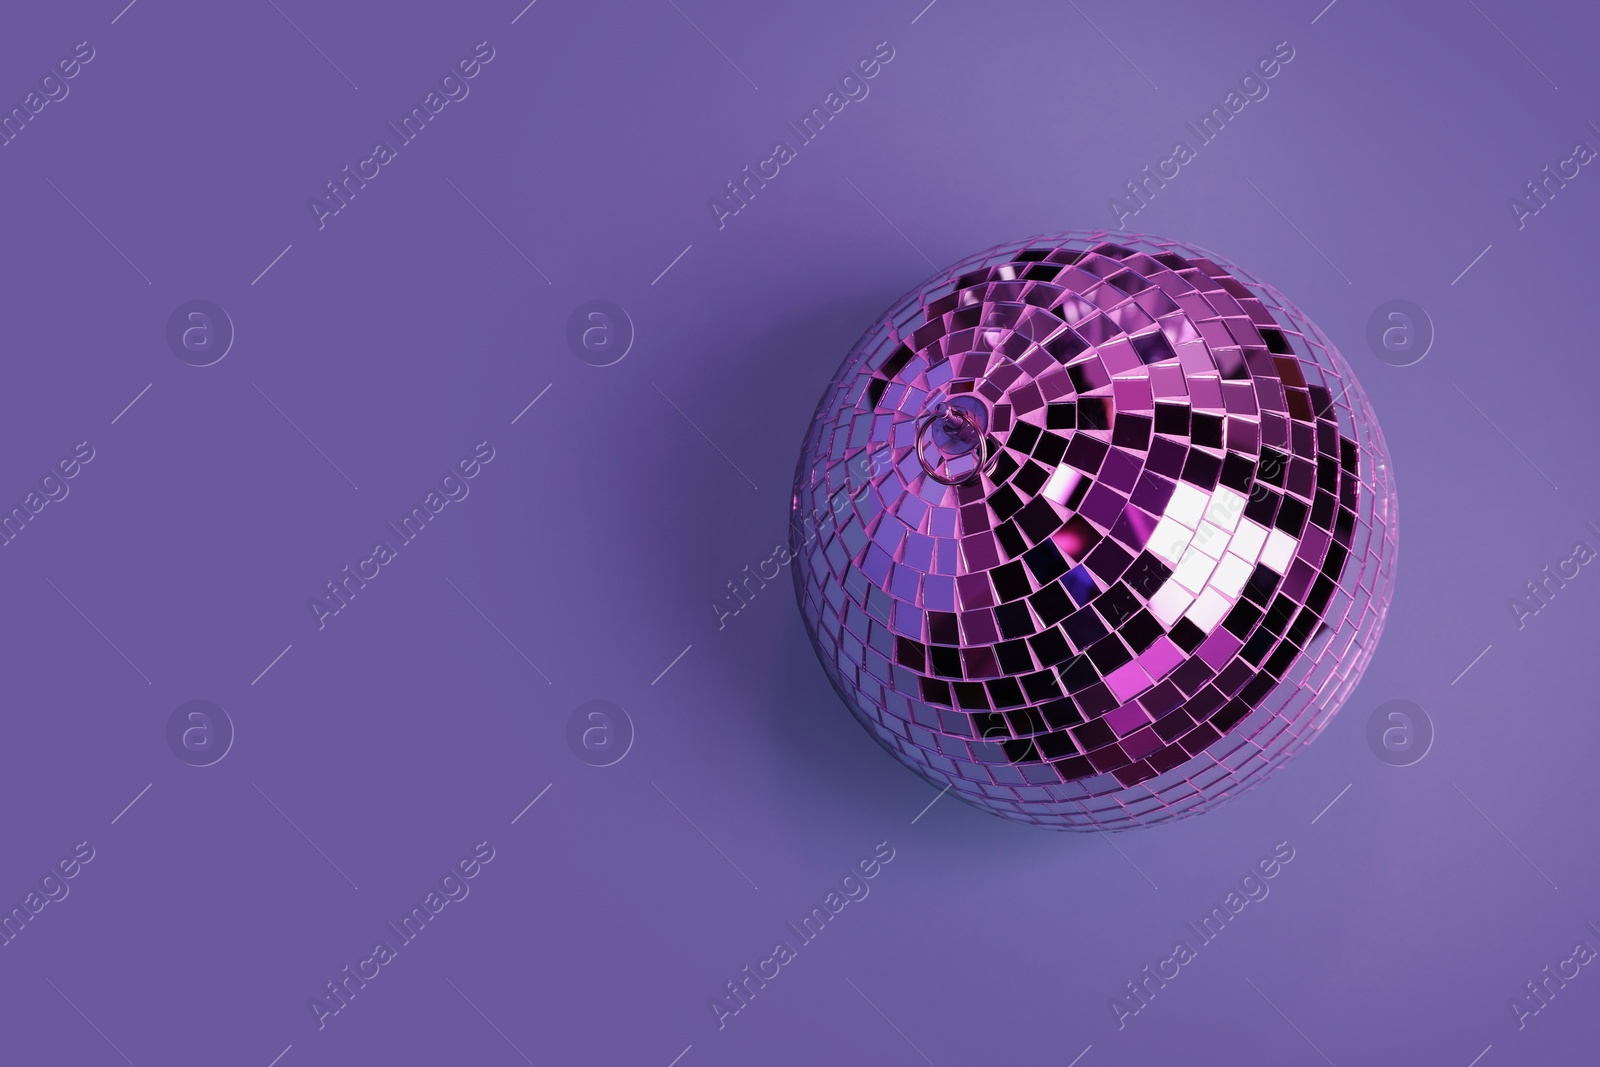 Photo of Shiny disco ball on violet background, top view. Space for text